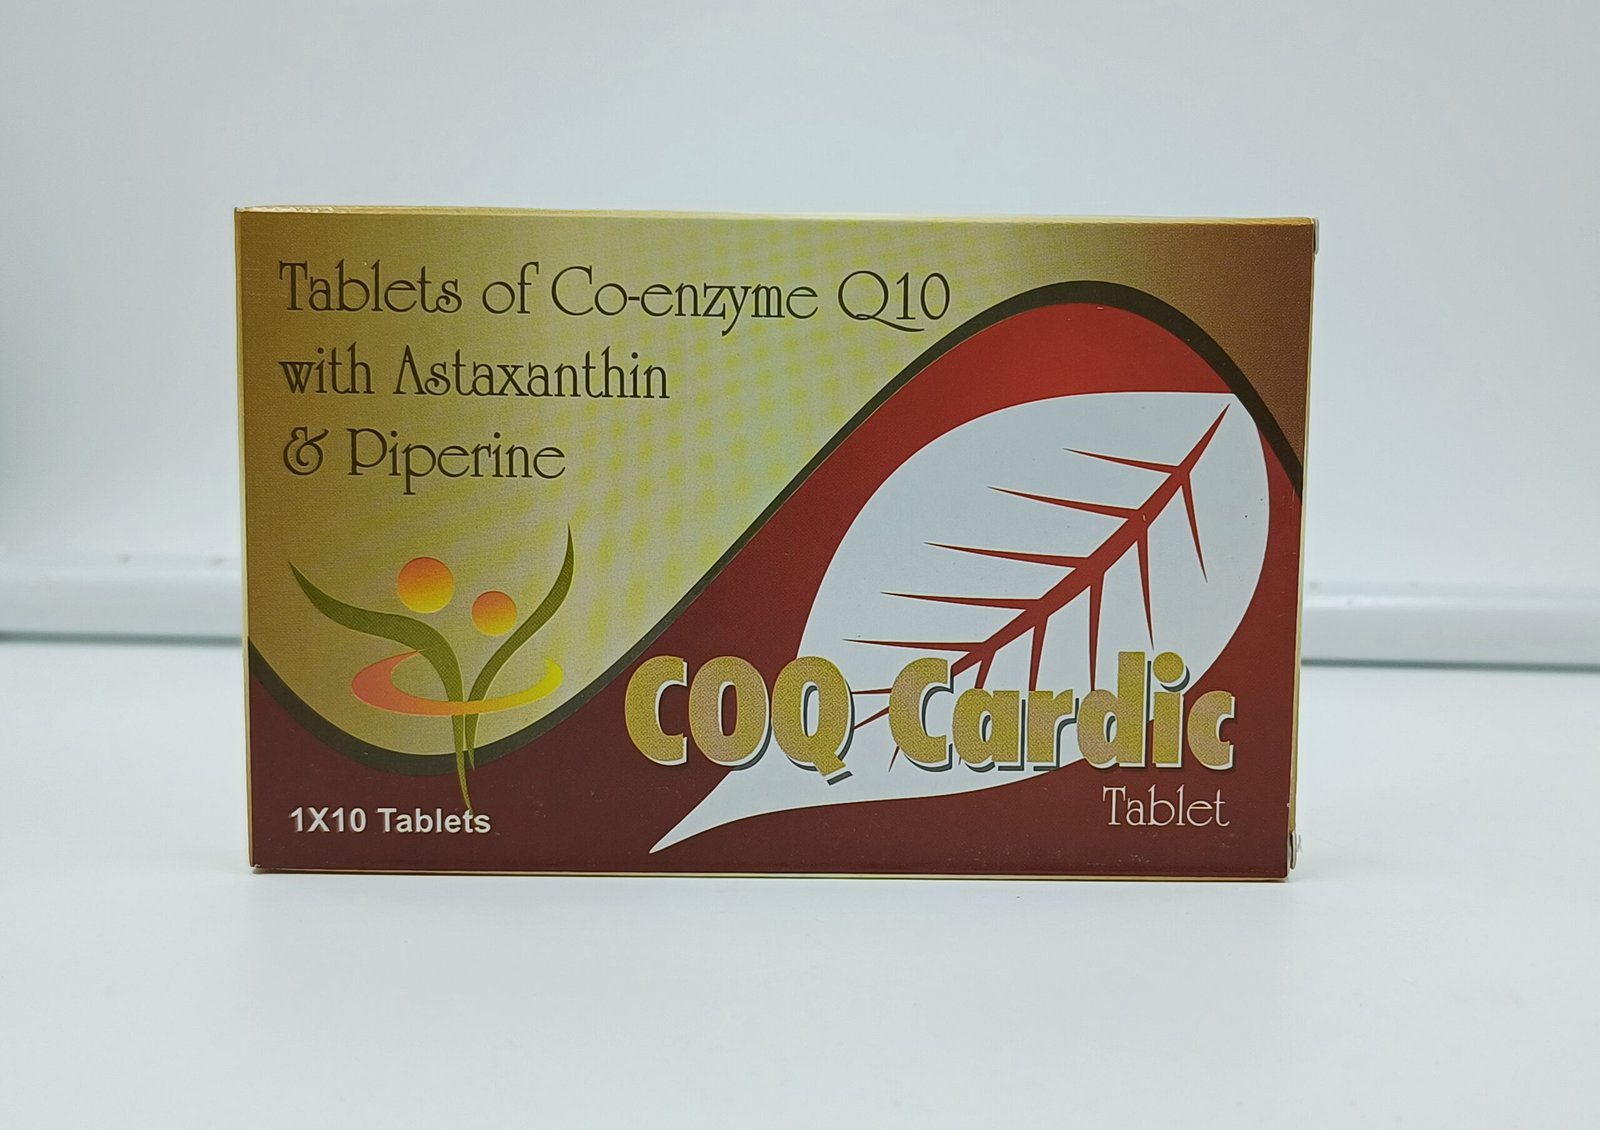 COQ - CARDIC Tablets (Pack of 10)